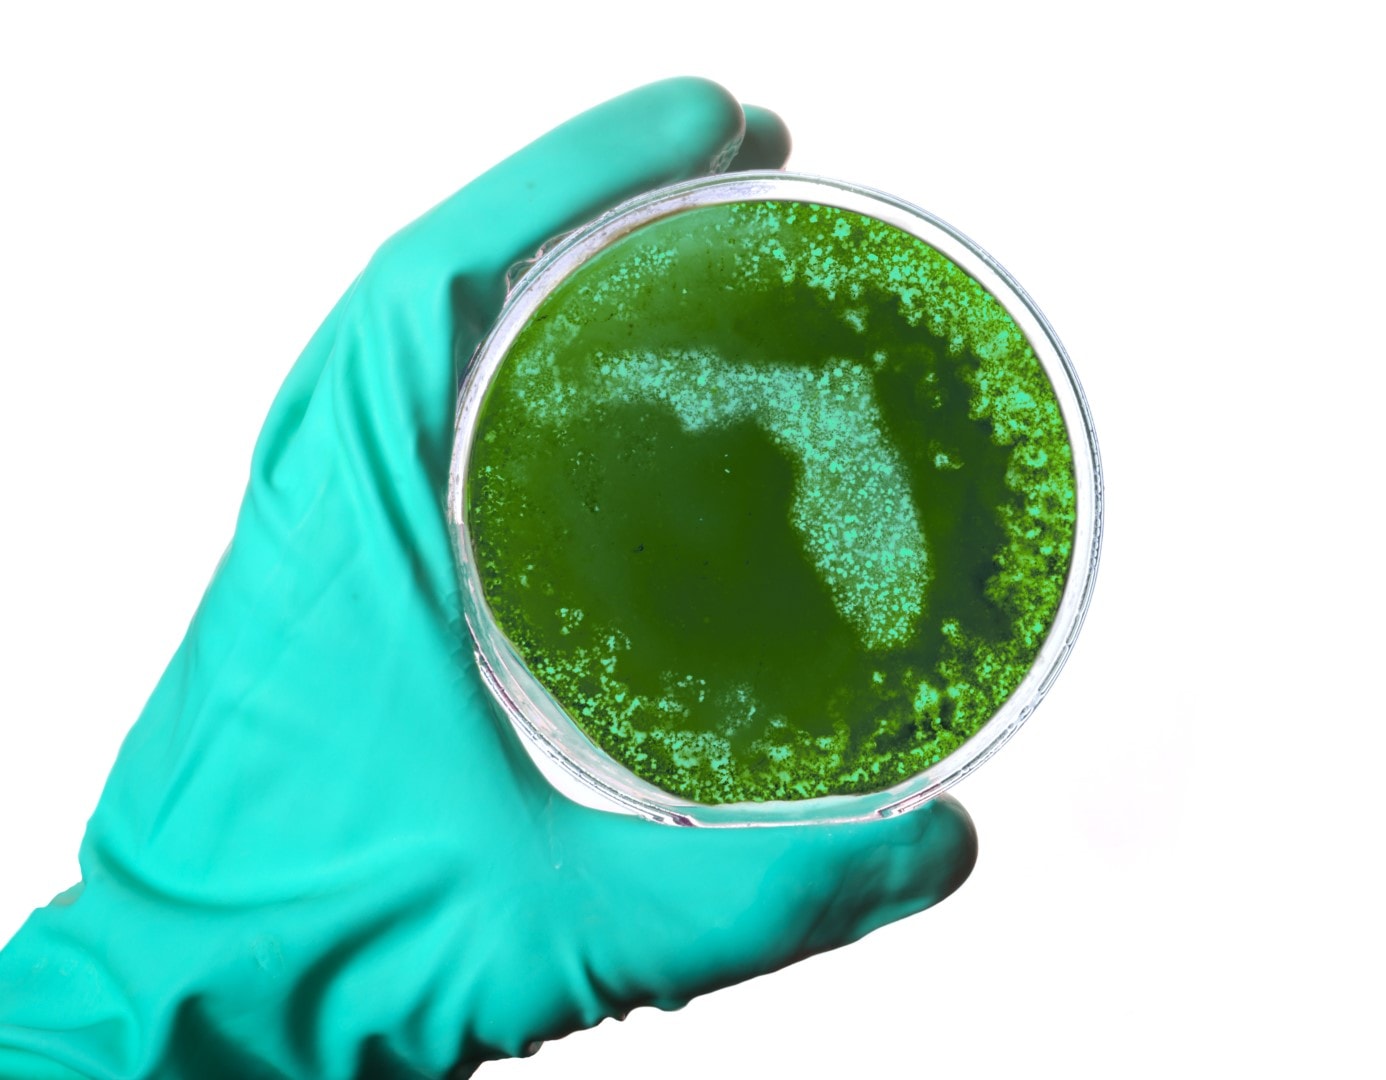 Germs in the shape of Florida in a petri dish.(series)